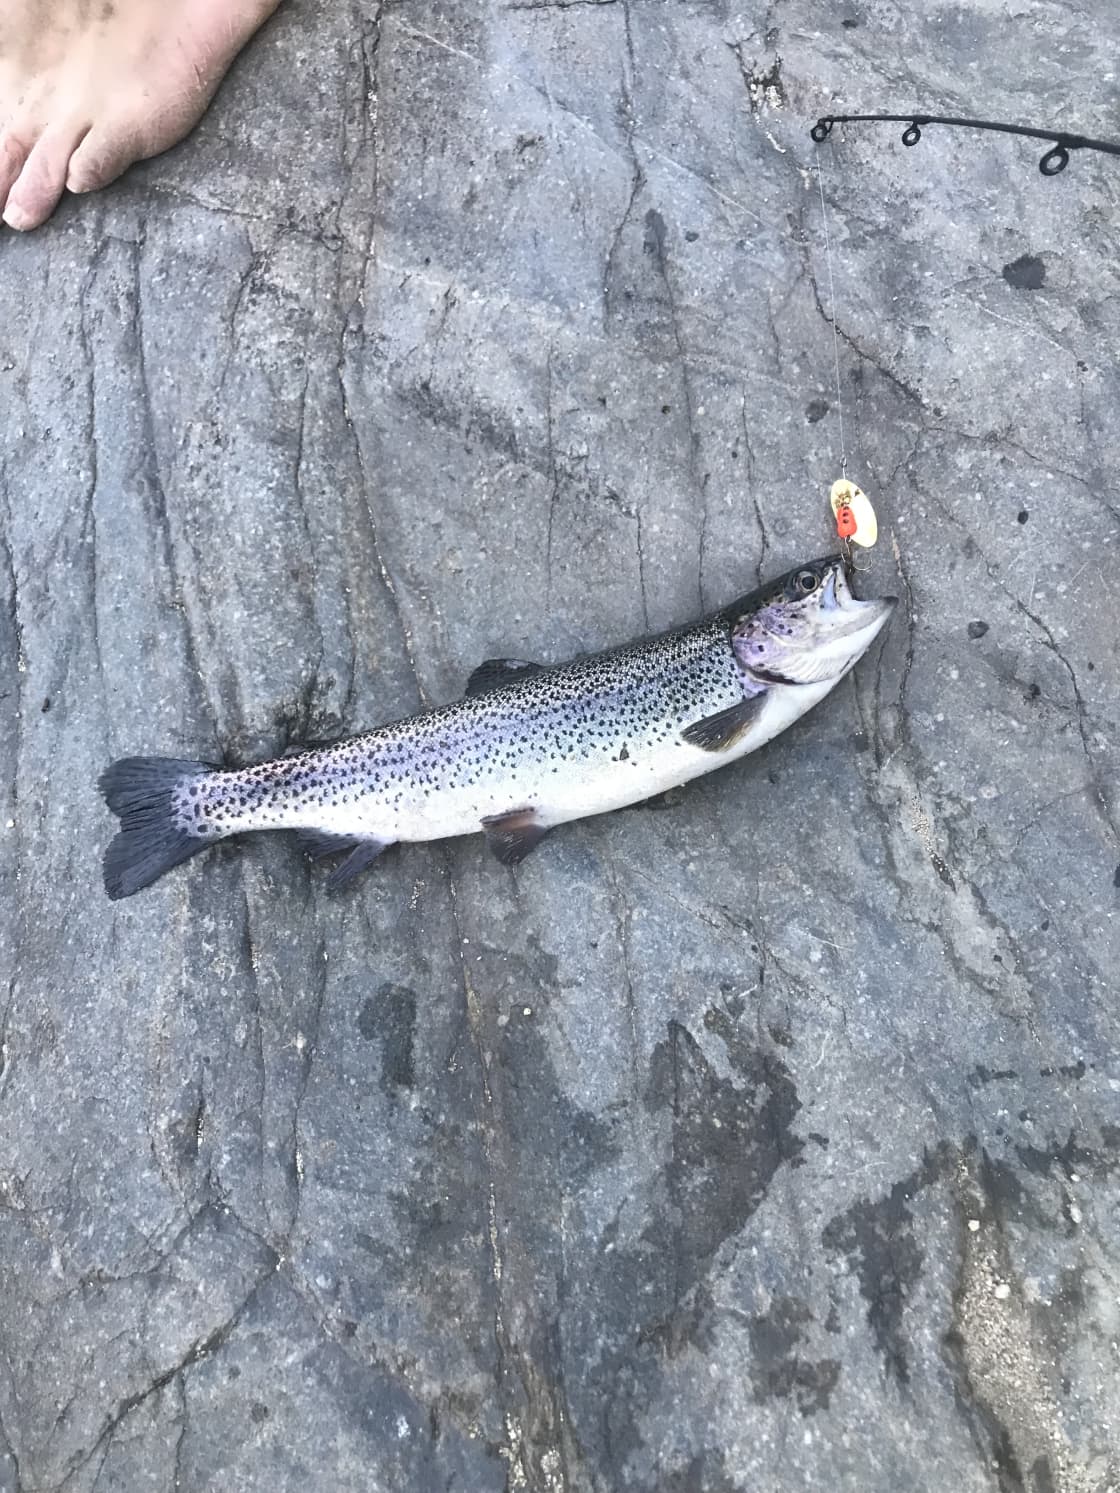 lil rainbow trout from Kern River